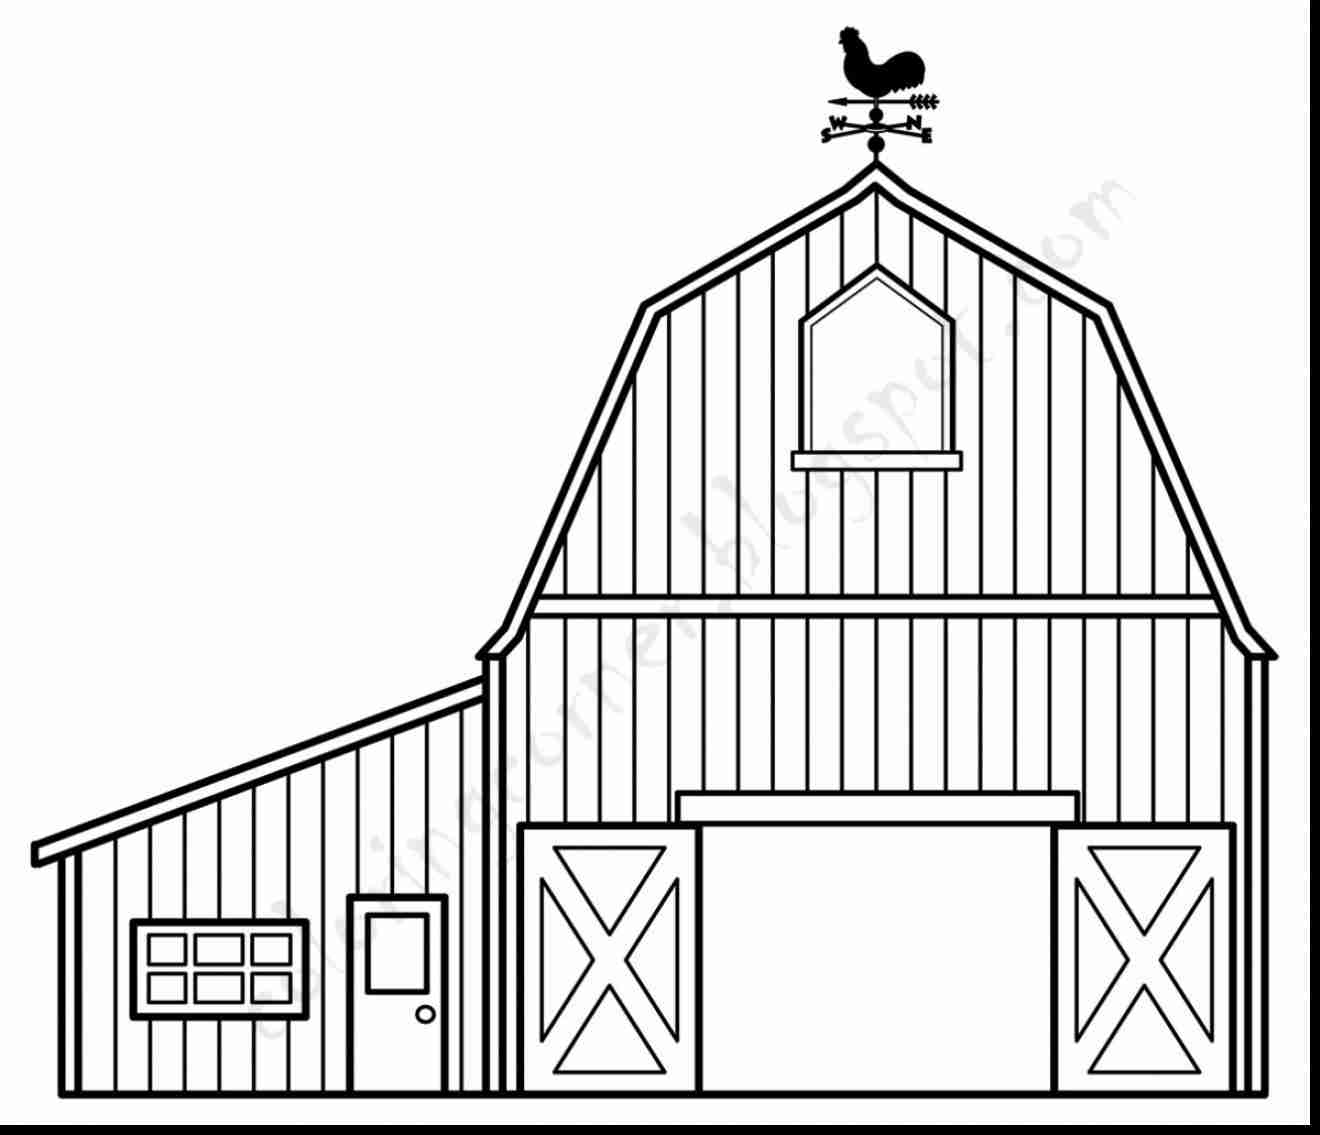 Barn Coloring Pages - Free Printable Coloring Pages for Kids